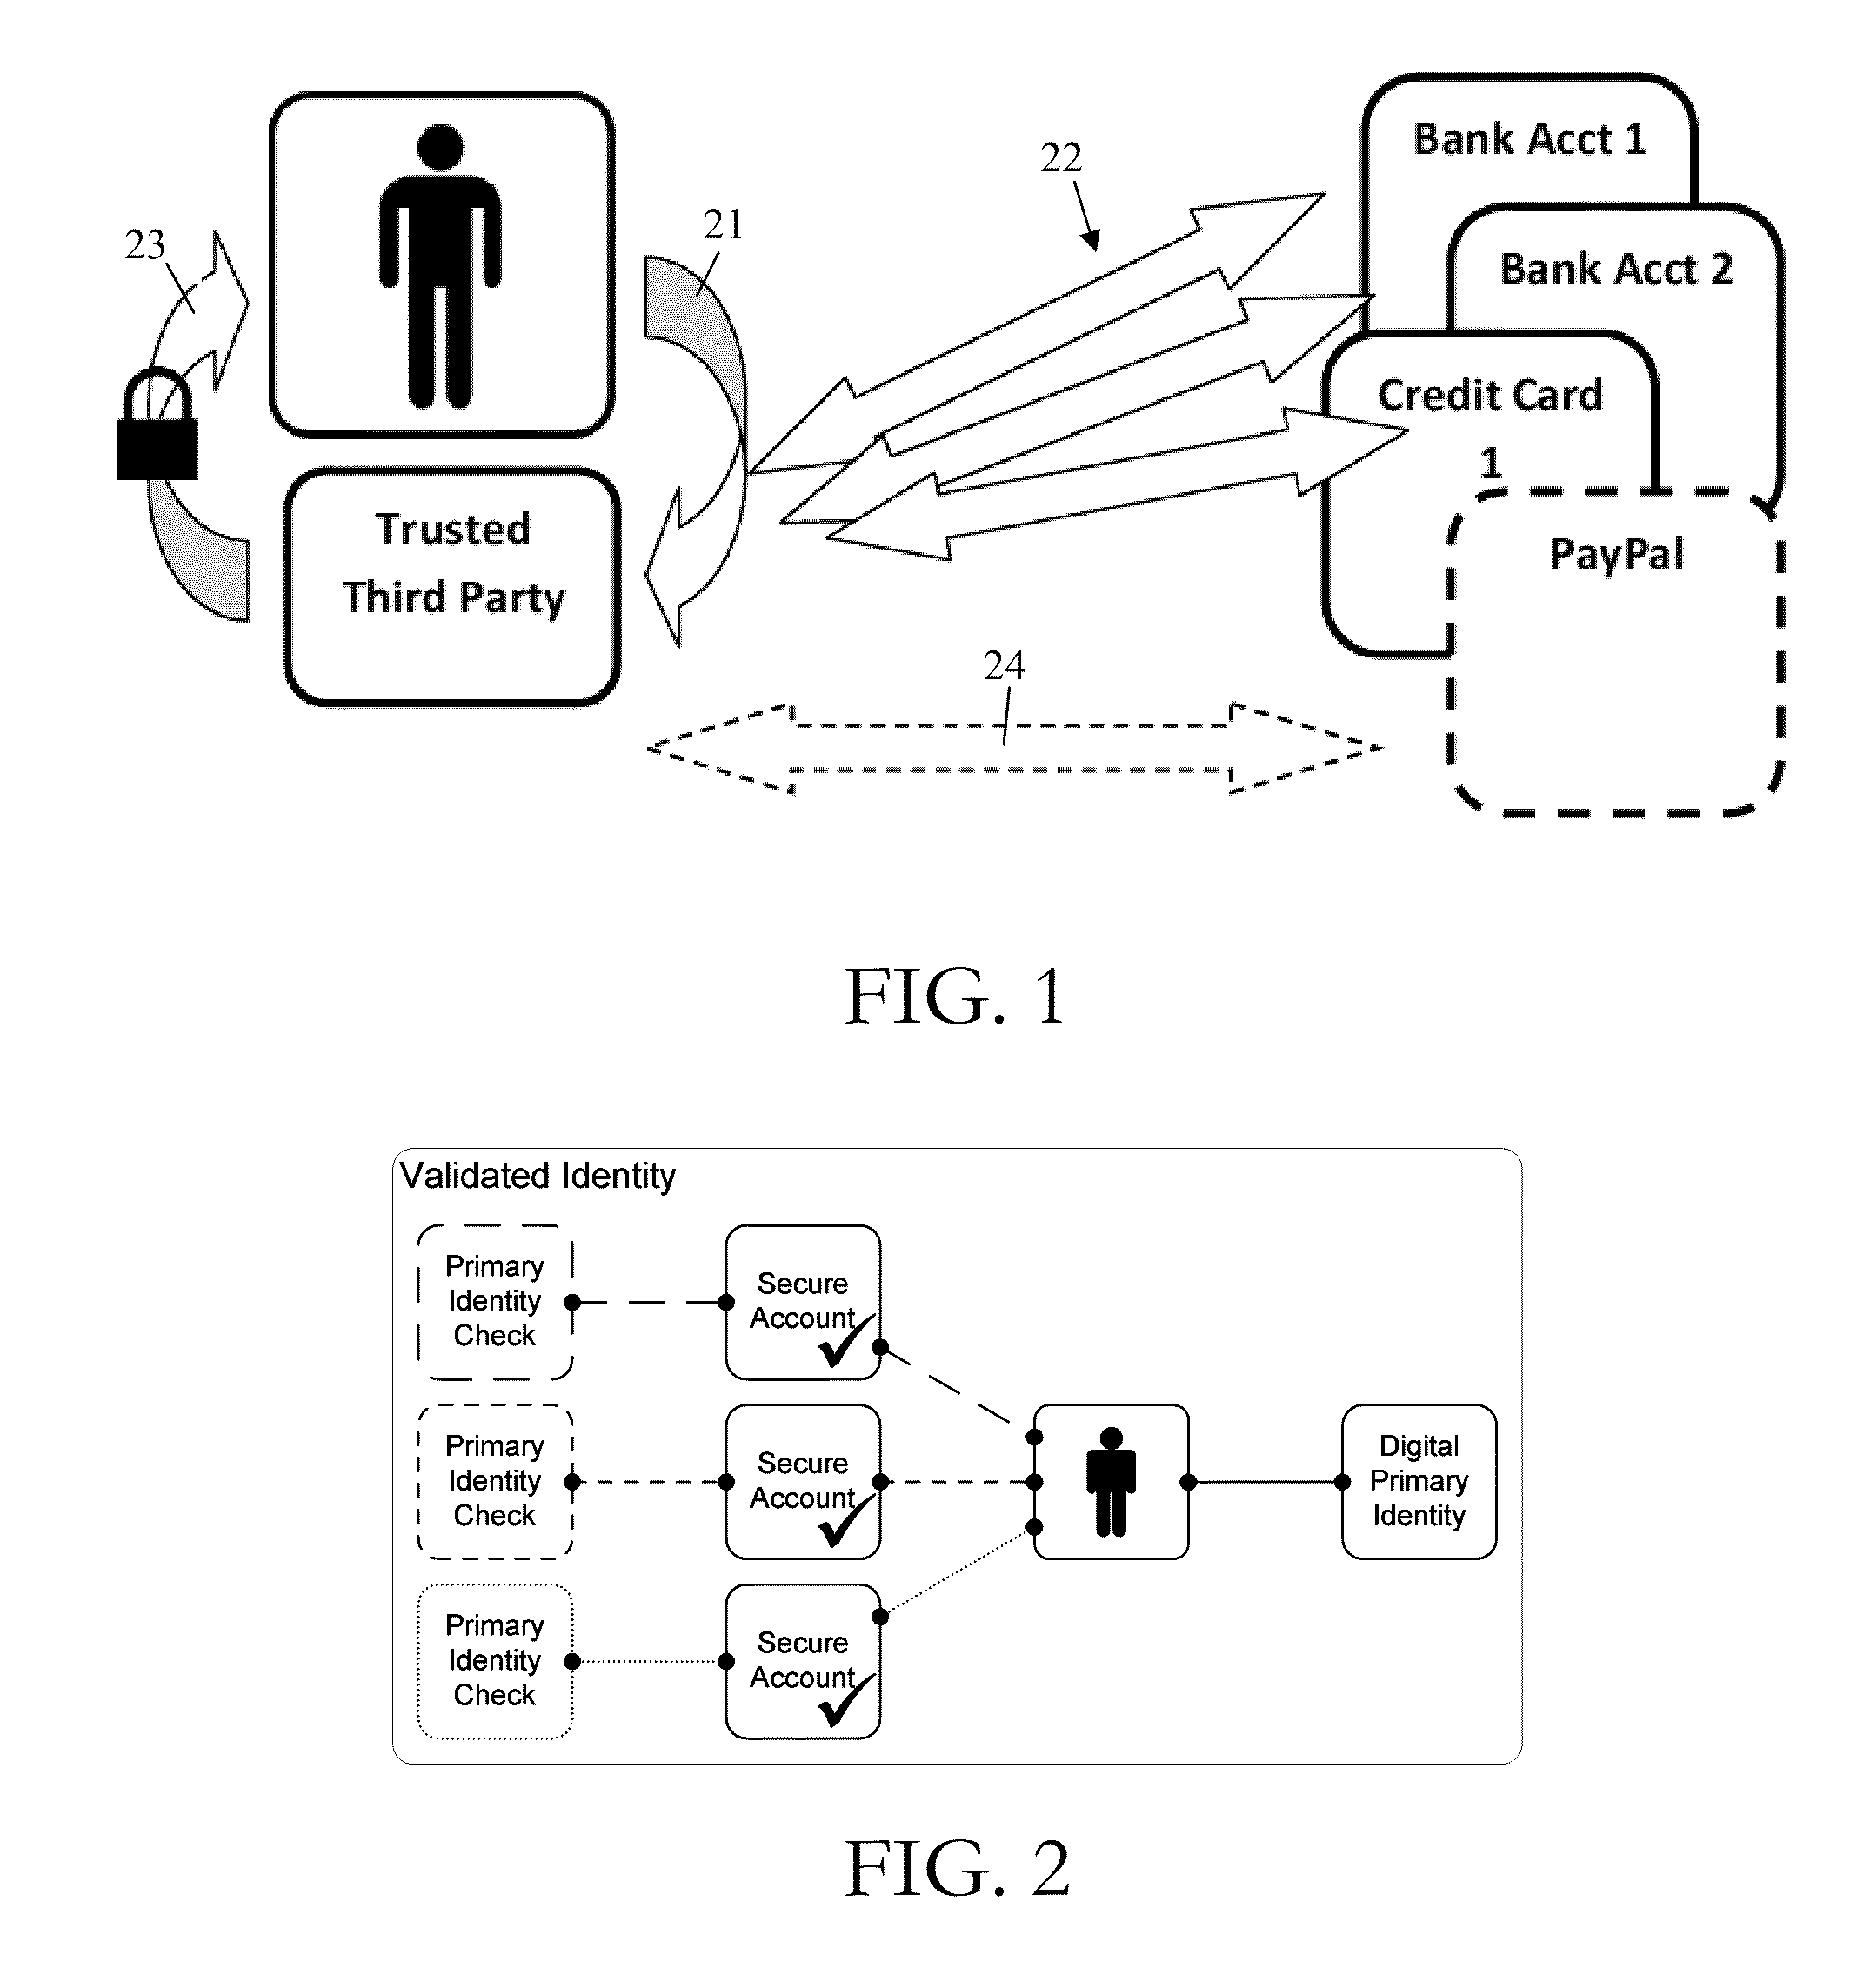 Method of establishing identity validation based on an individual's ability to access multiple secure accounts